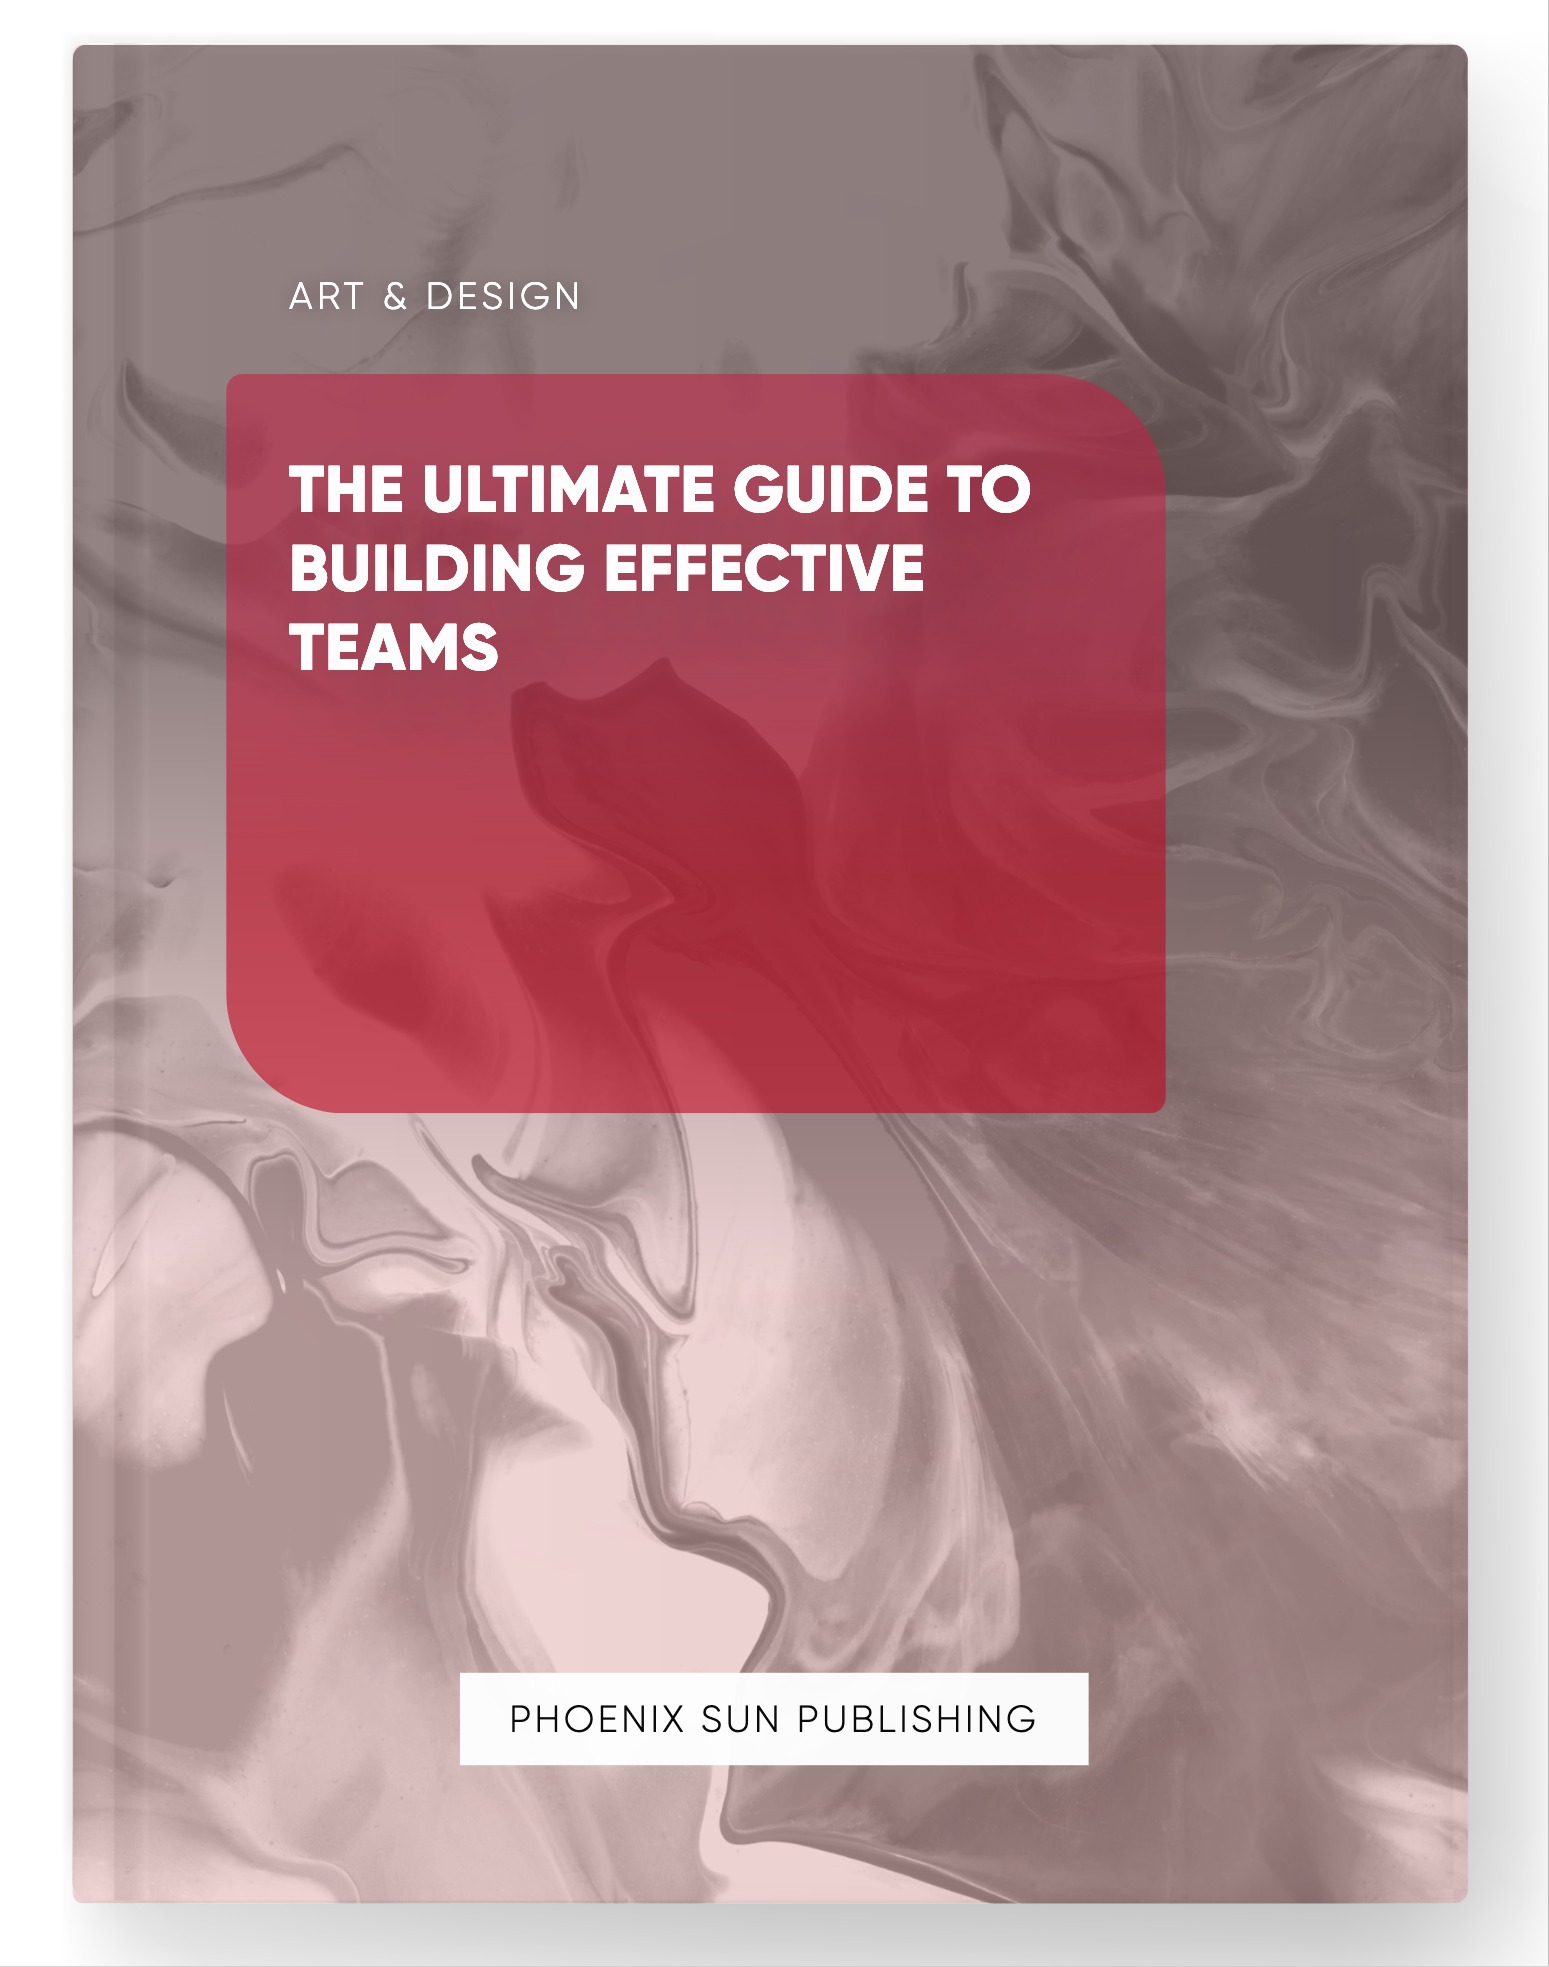 The Ultimate Guide to Building Effective Teams